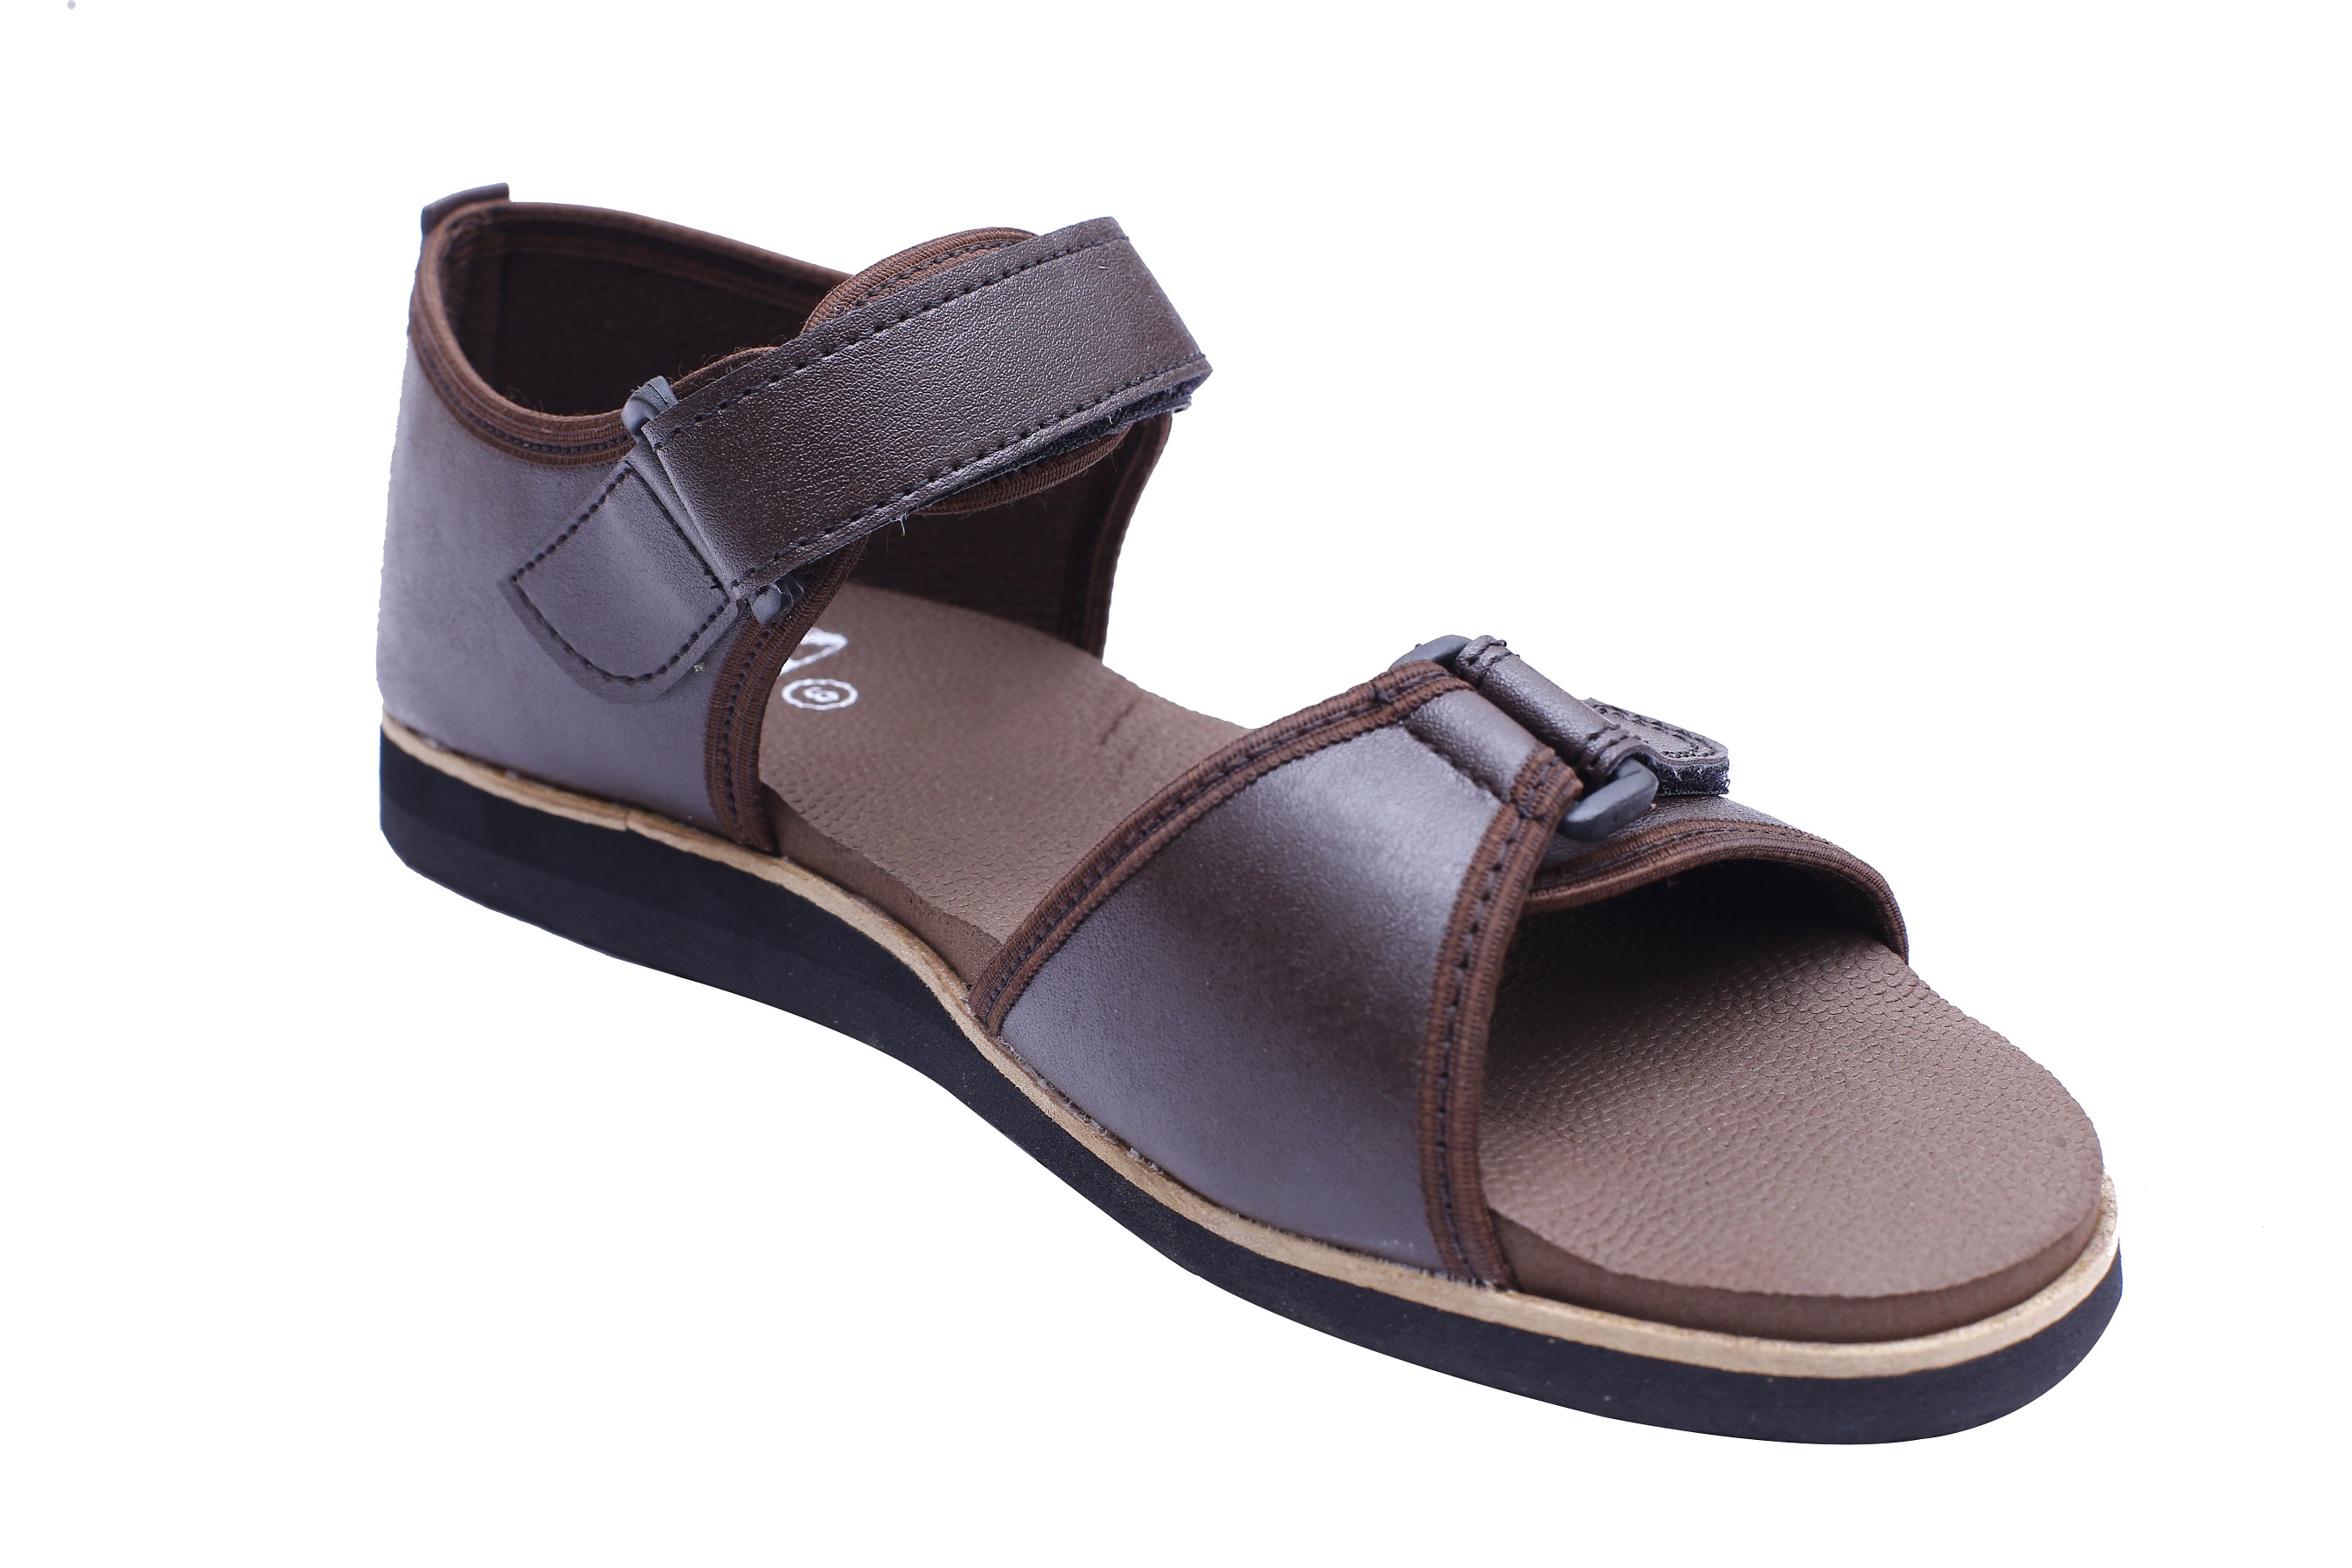 Buy Podolite Women's DIA FOOT Brown Sandals Online @ ₹579 from ShopClues